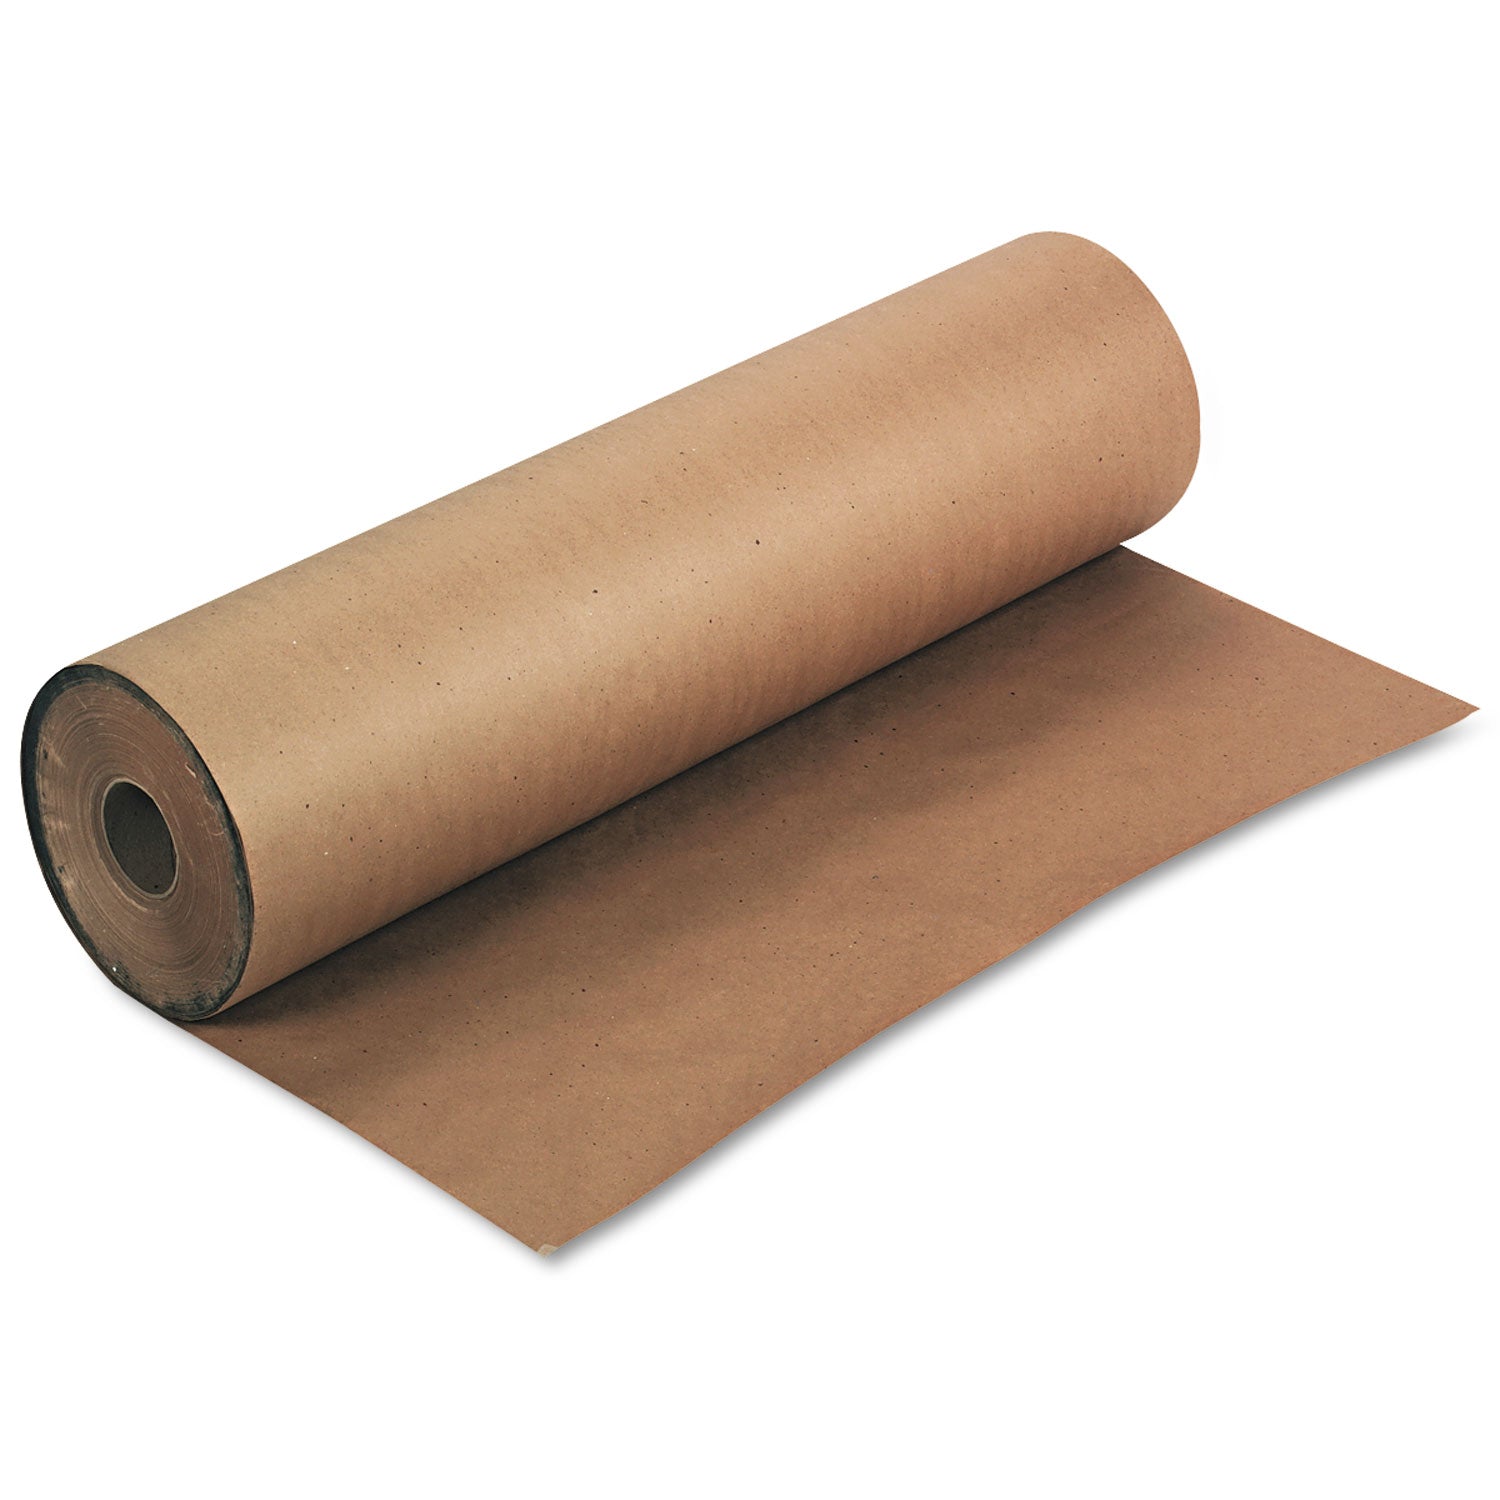 Kraft Paper Roll, 50 lb Wrapping Weight, 36" x 1,000 ft, Natural - 